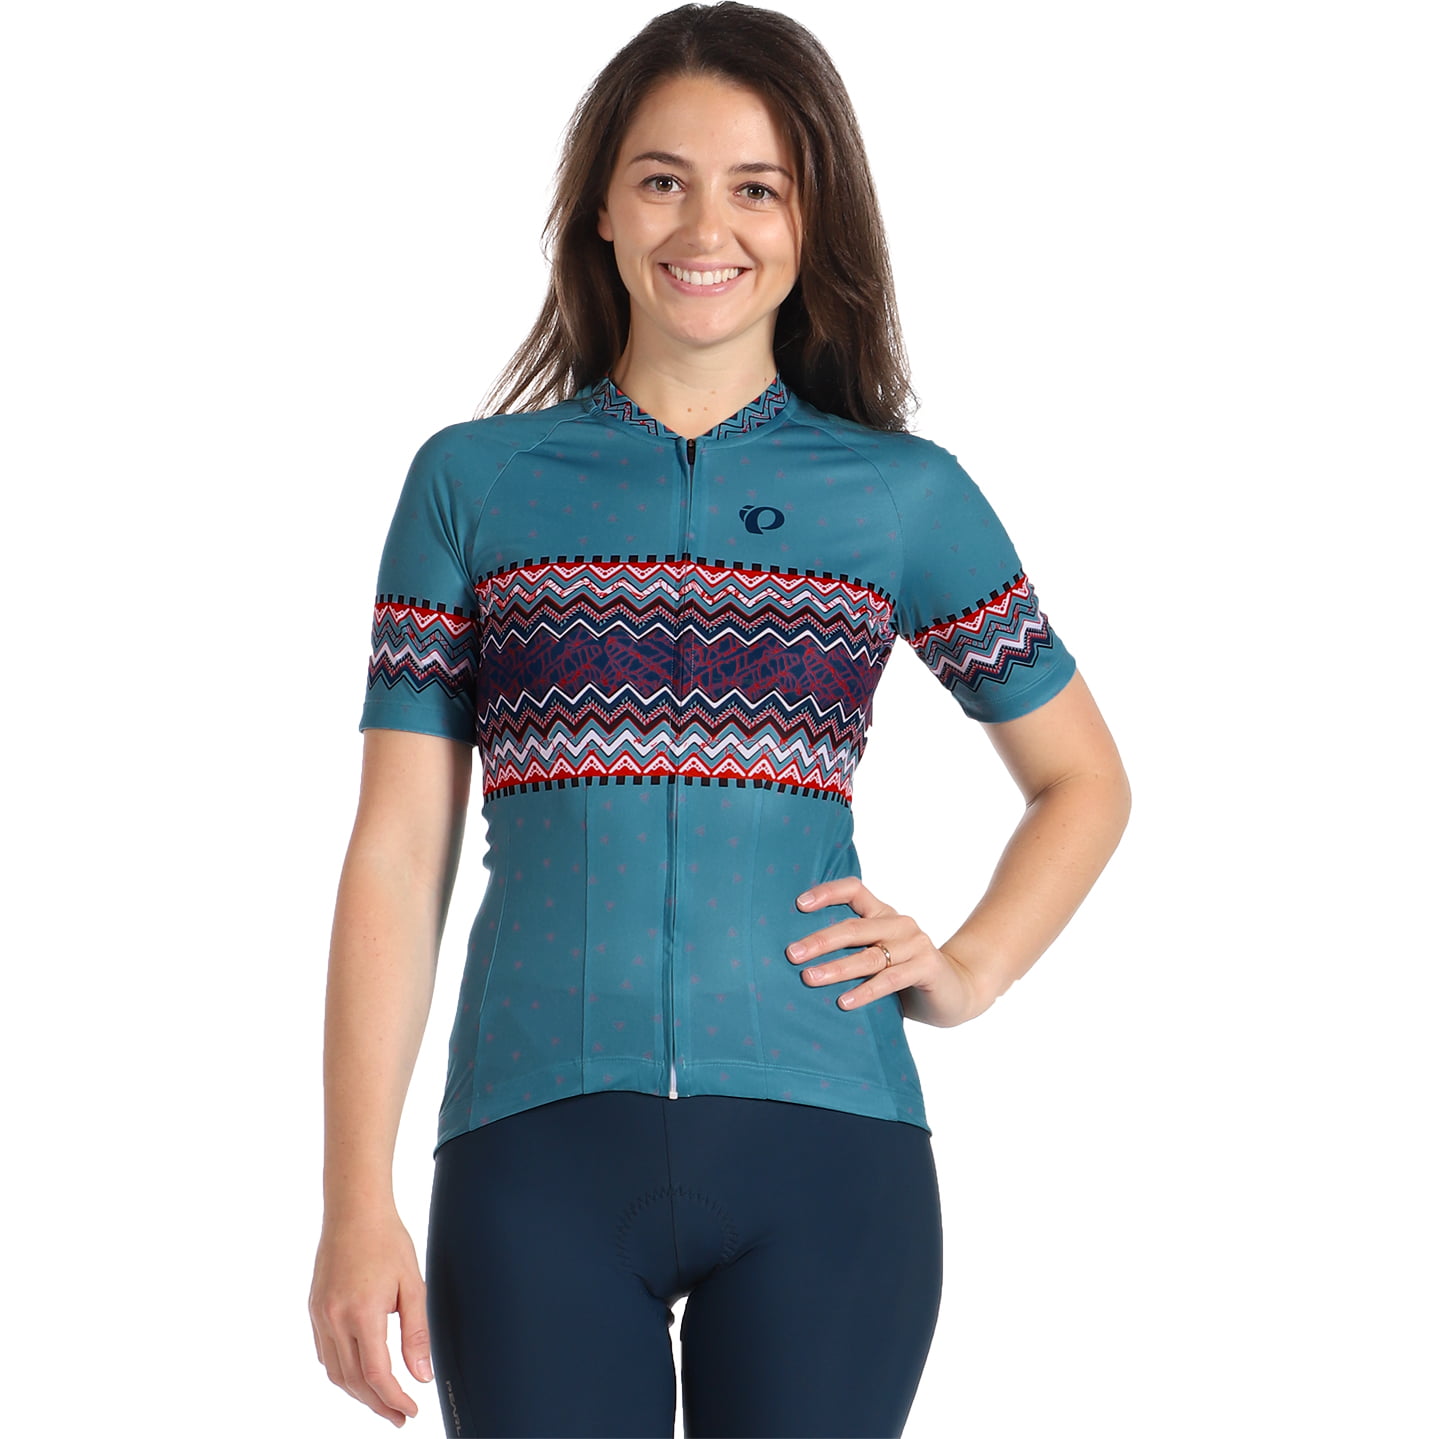 PEARL IZUMI Attack Women’s Jersey Women’s Short Sleeve Jersey, size M, Cycling jersey, Cycle clothing